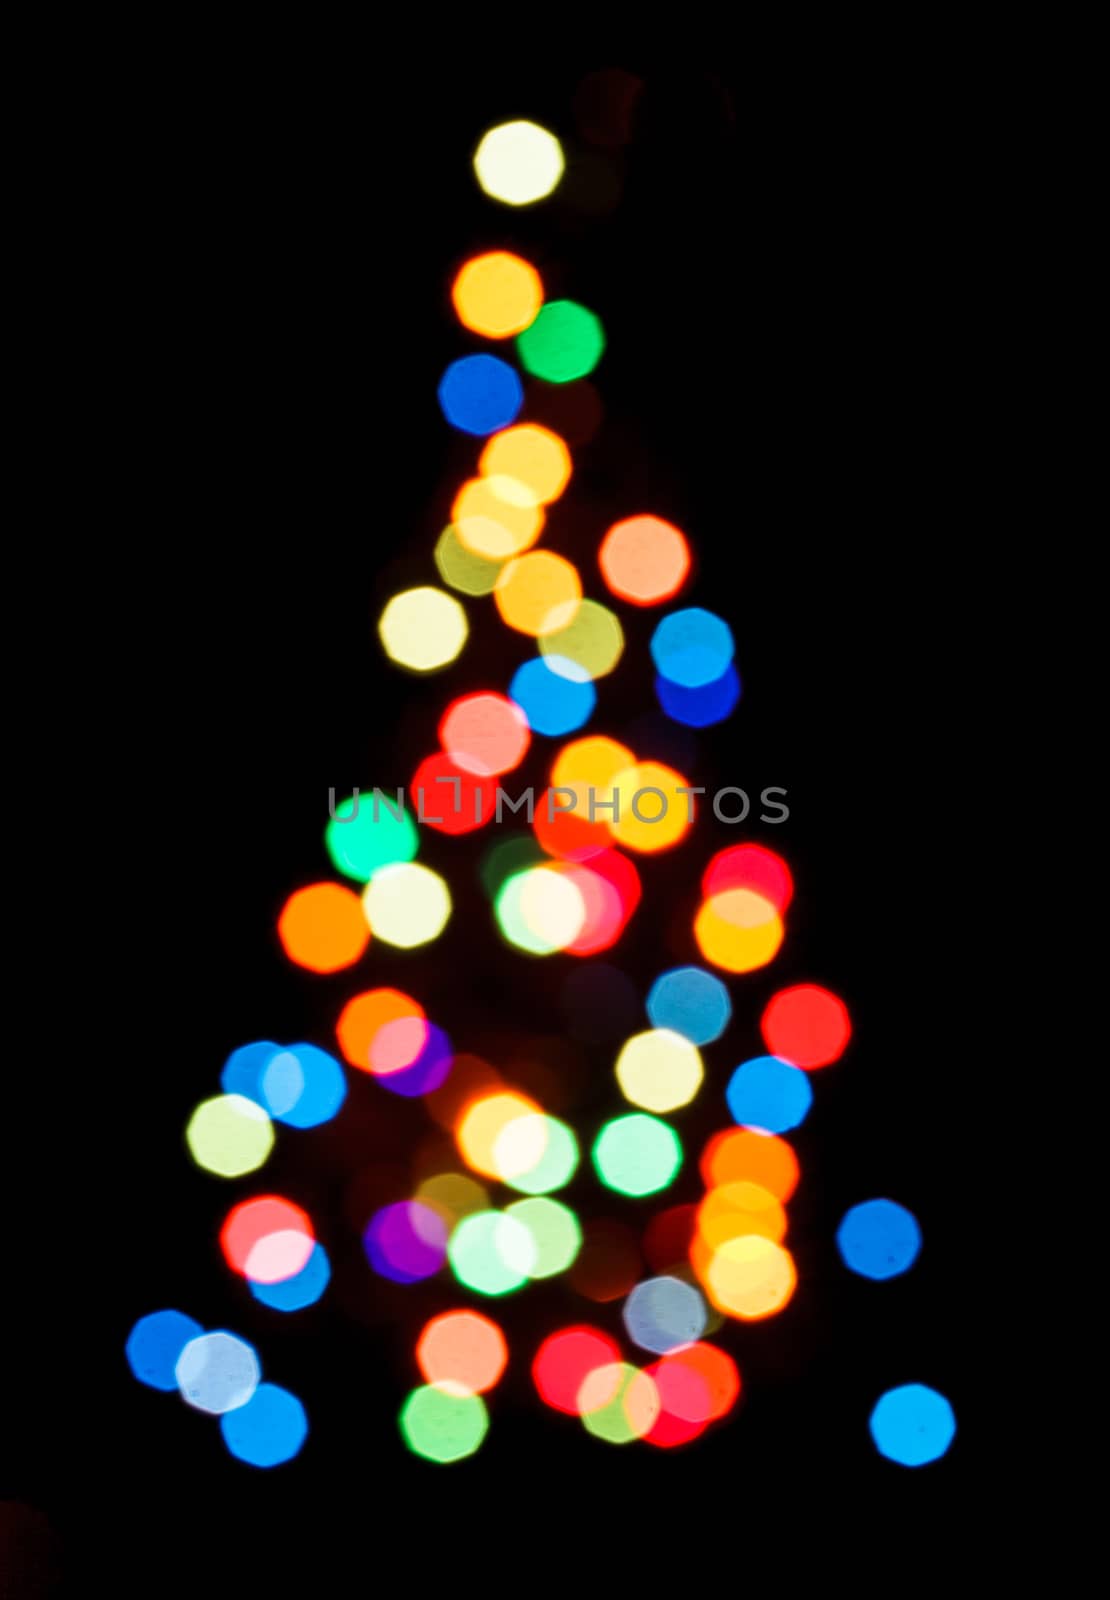 Blurred colorful lights as a silhouette of Christmas tree on black